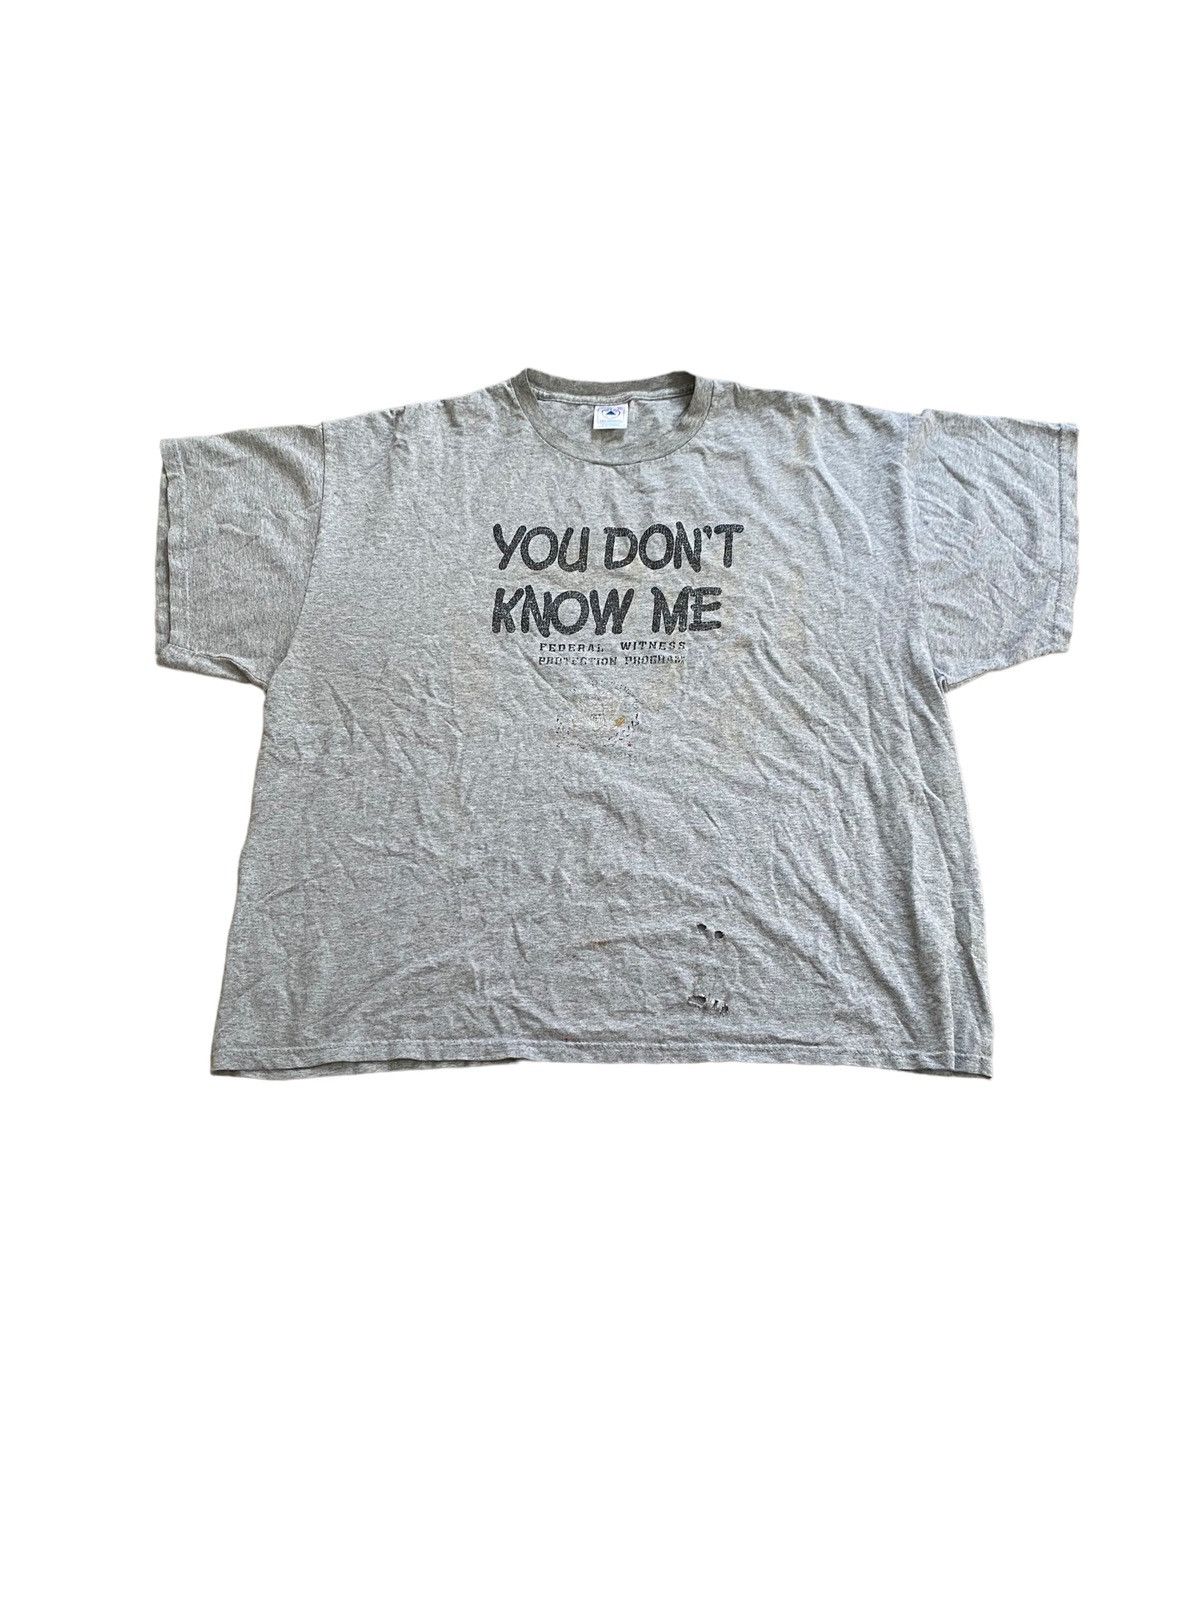 Vintage You don't know me federal witness protection T-shirt 90s